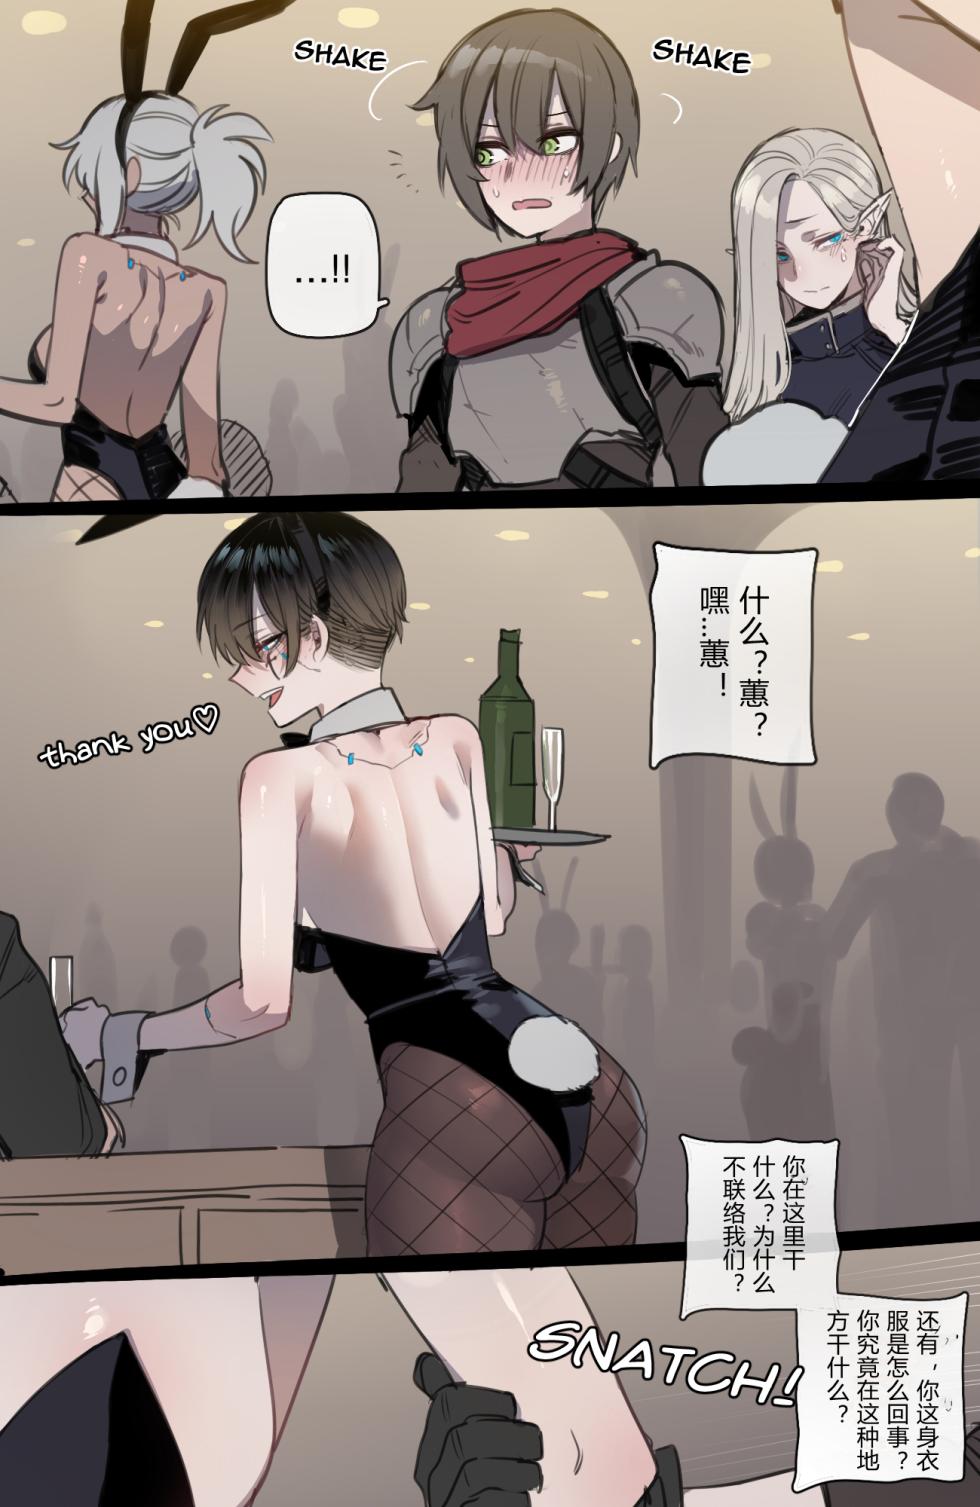 [ratatatat74] Bad Ending Party [chinese](Ongoing) - Page 30